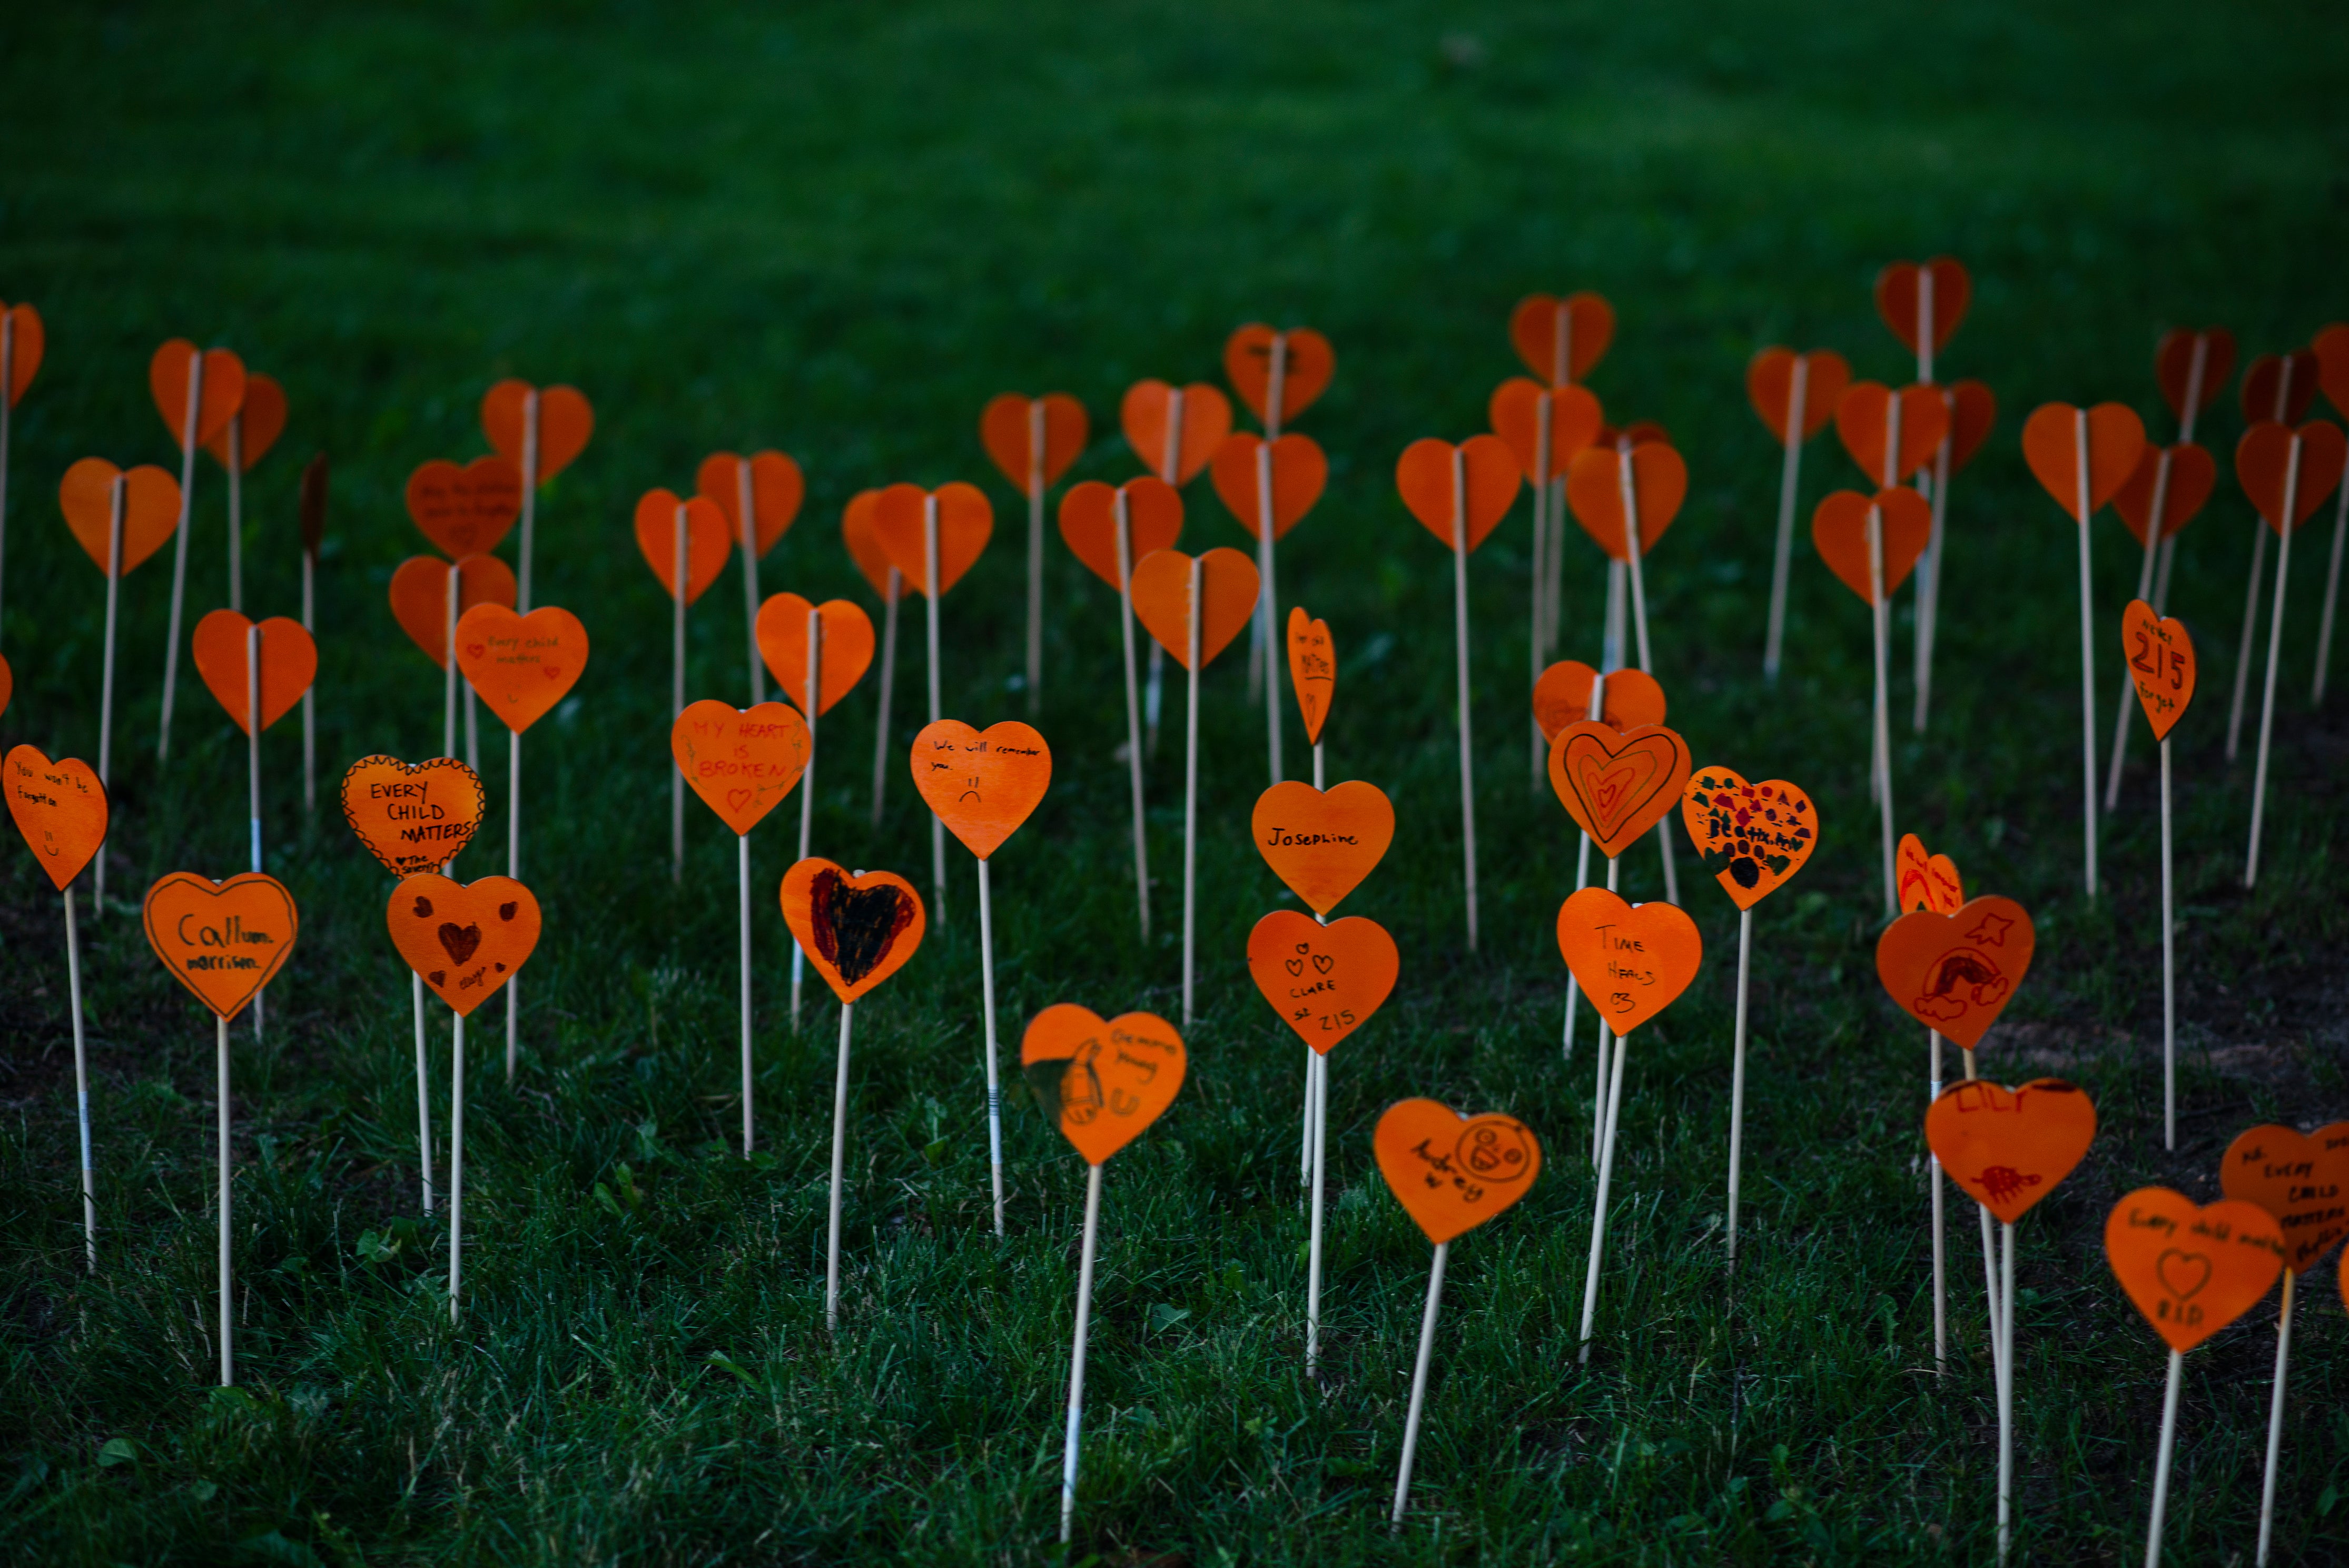 Image of green grass with multiple Orange Hearts spread throughout the lawn